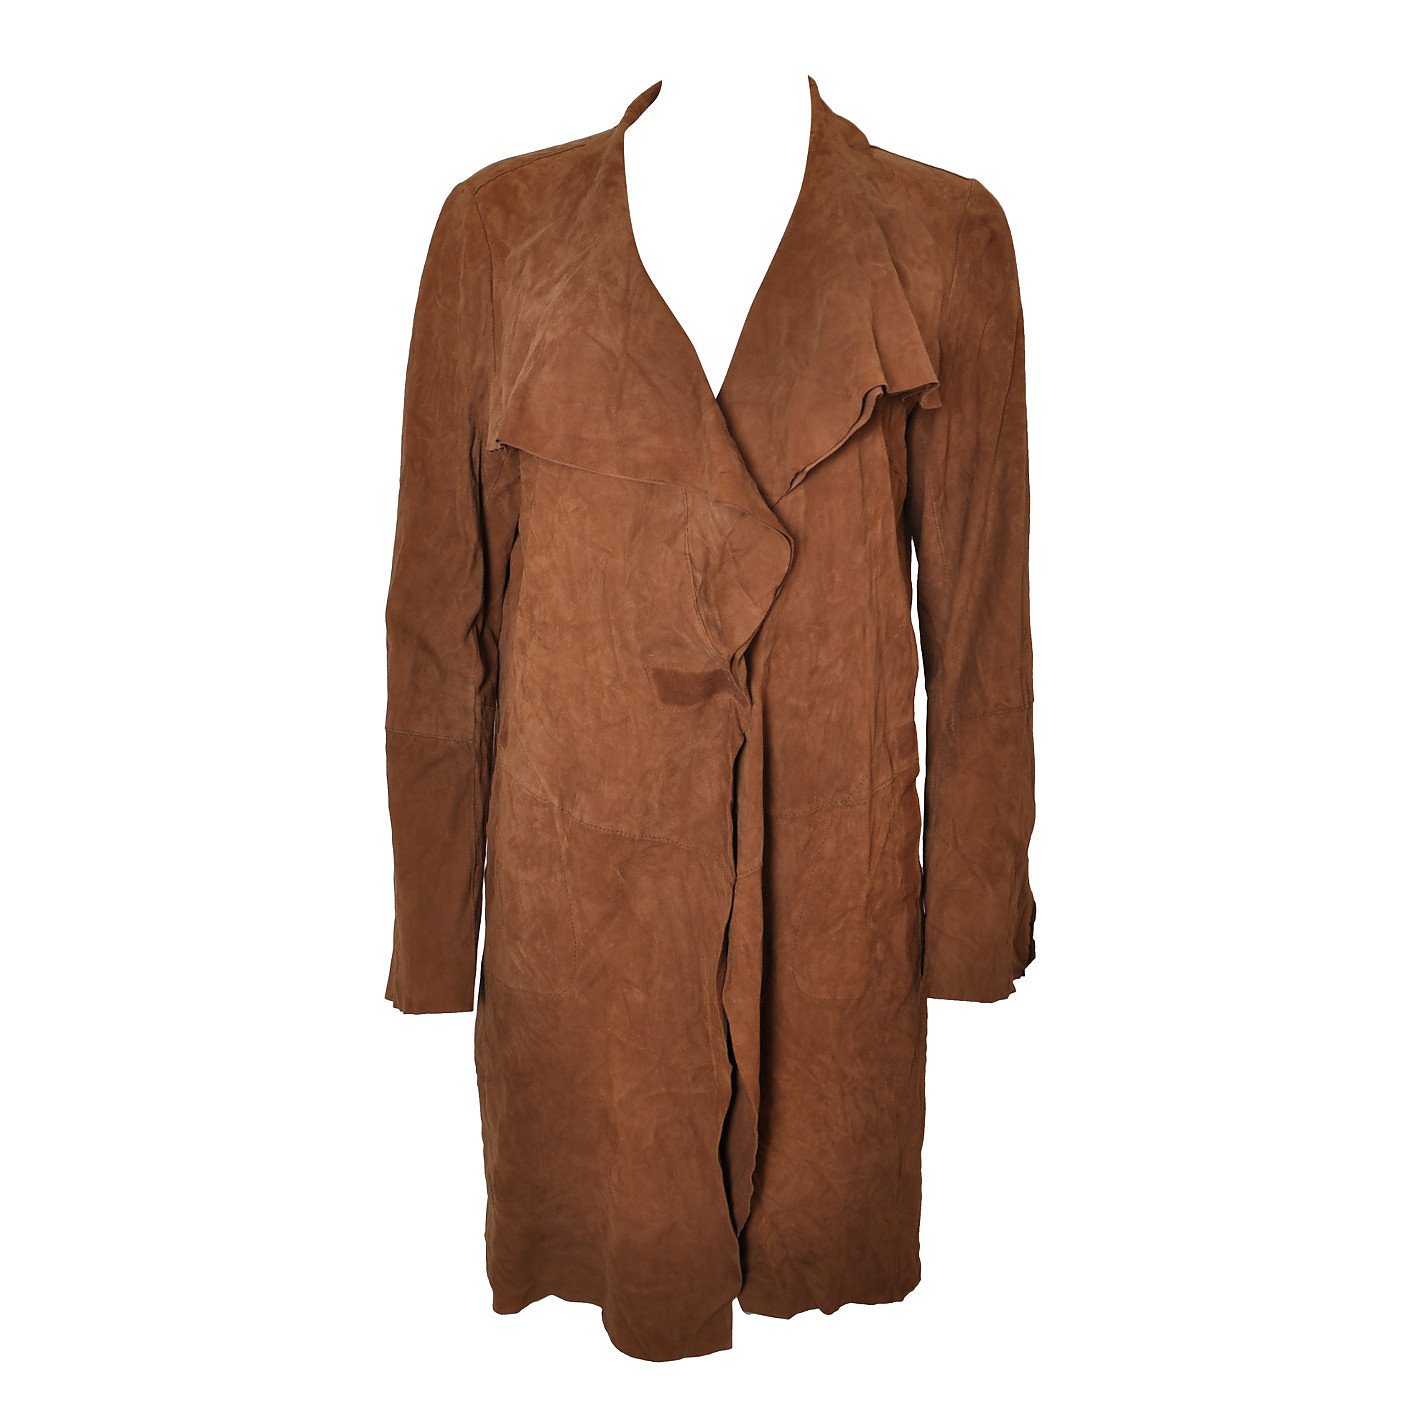 Marc Cain Ruffled Suede Jacket